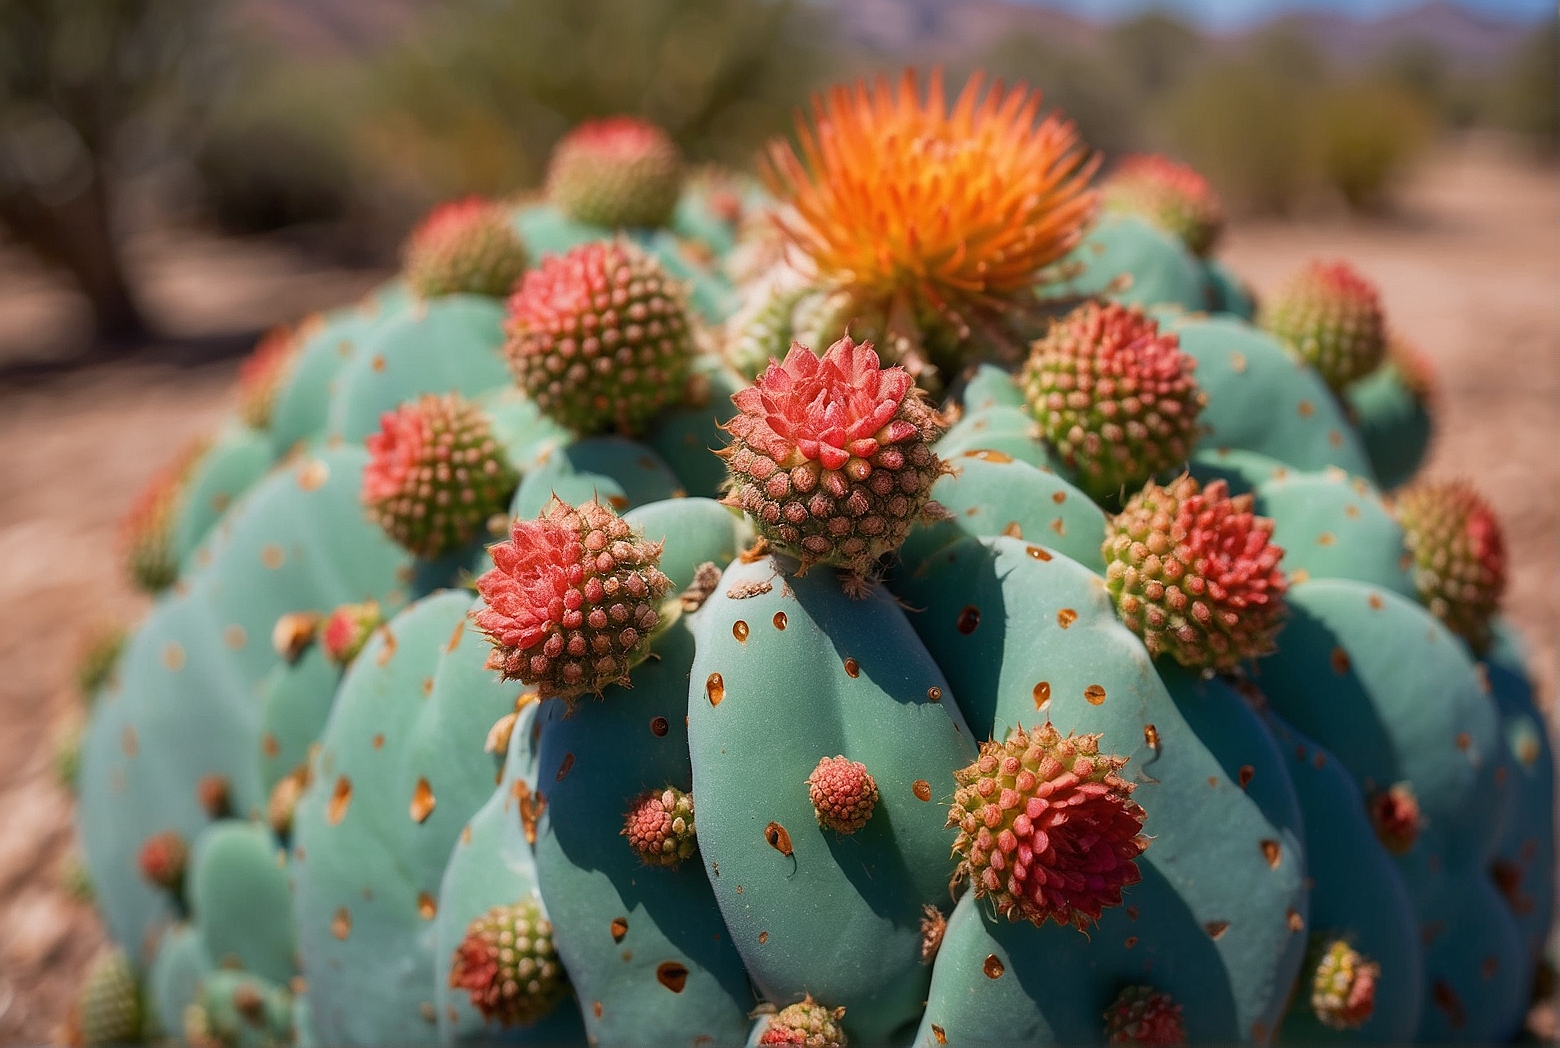 The Best Time to Harvest Peyote Cactus Fruit